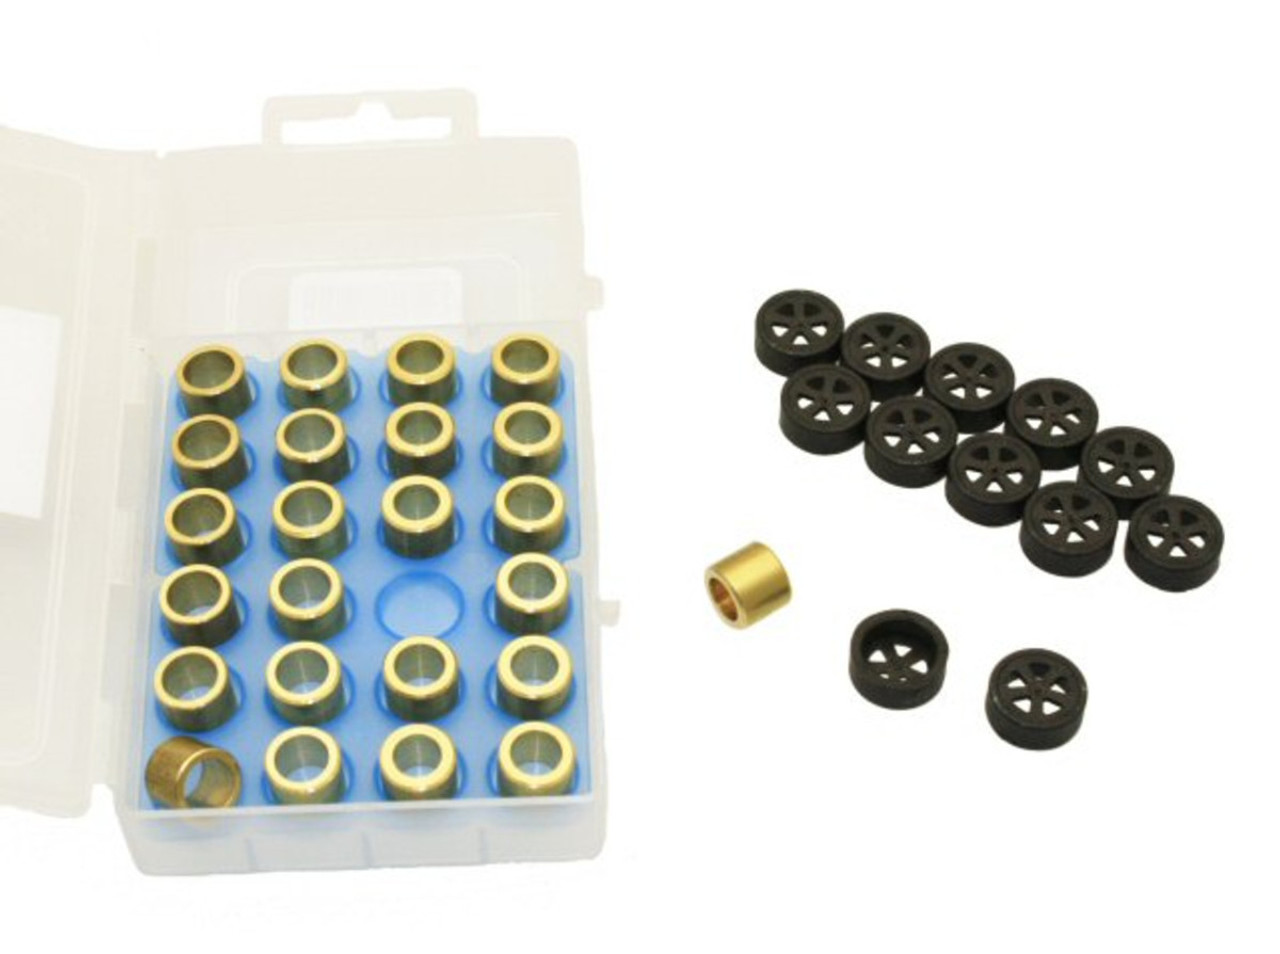 POLINI 16X13 ROLLER WEIGHT TUNING KIT IN 4.5, 5, 5.5 & 6 GRAM WEIGHTS